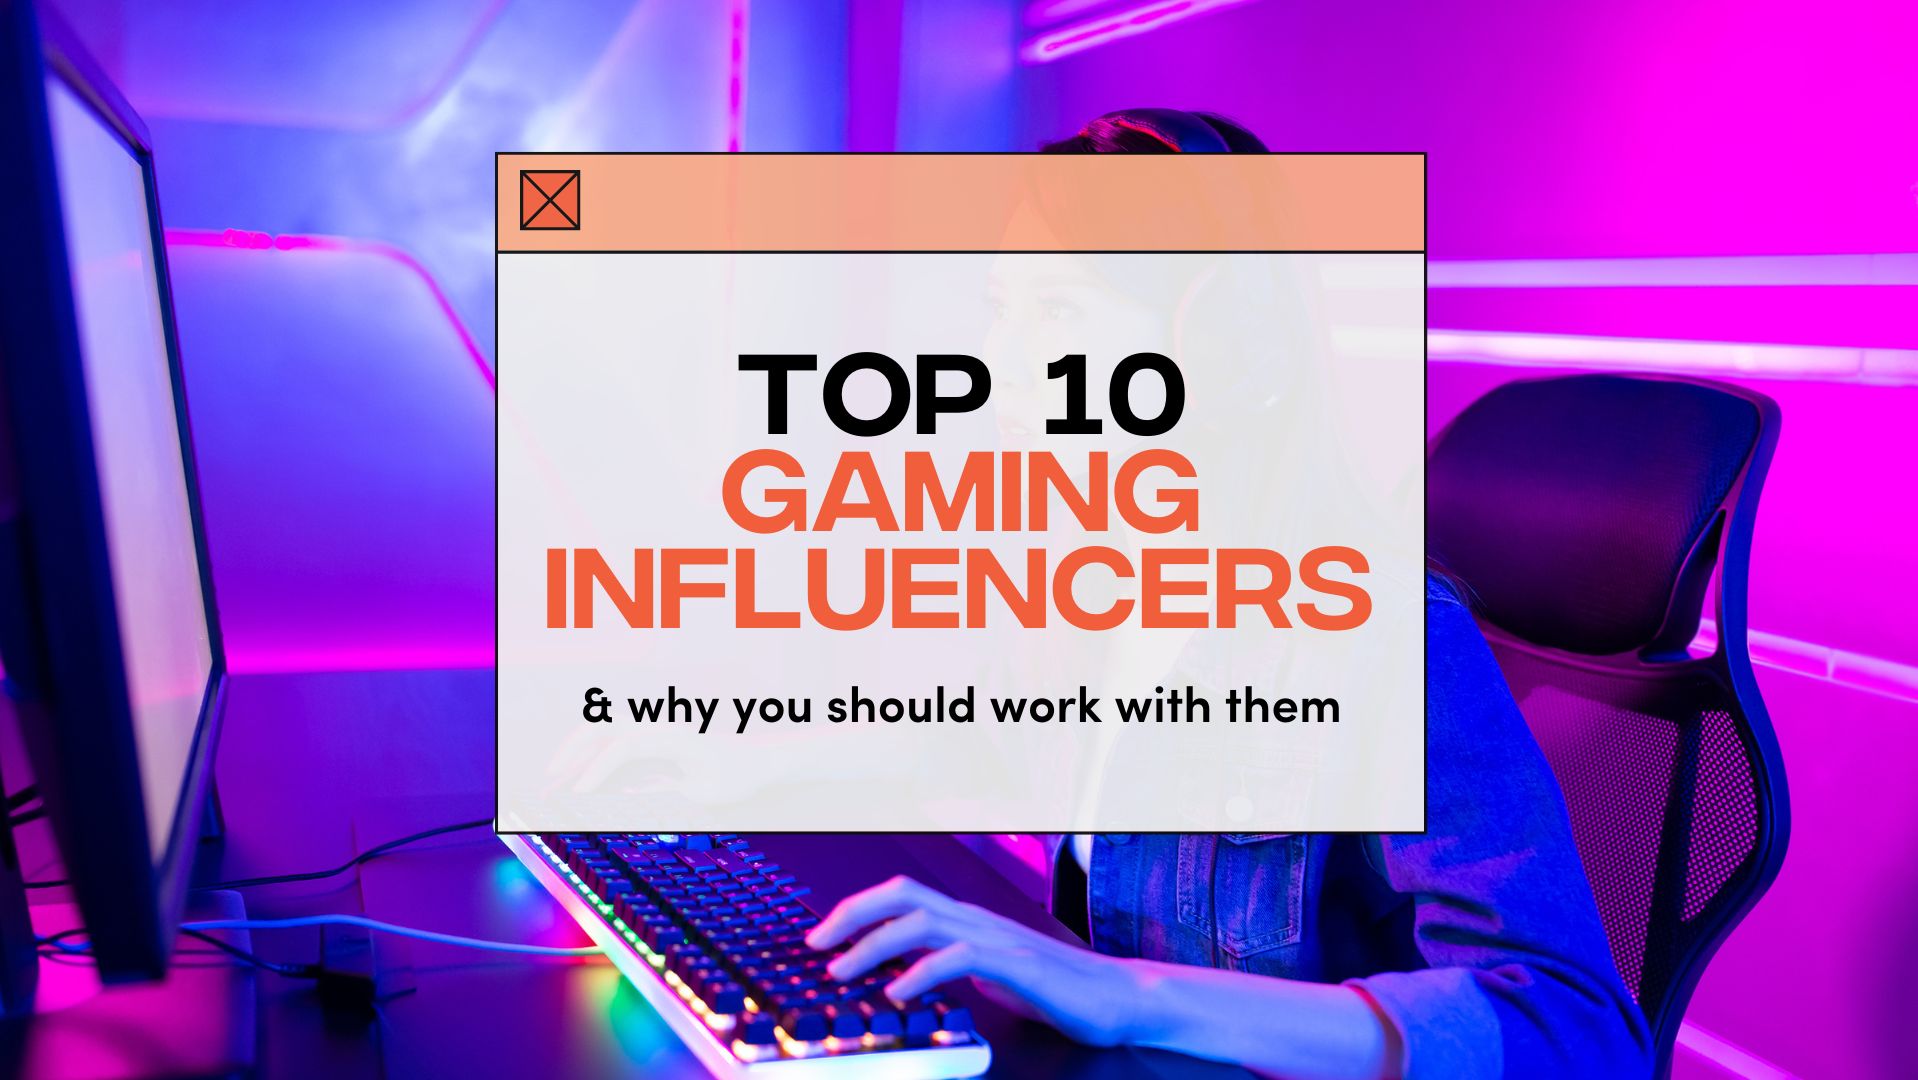 Fanbytes | Top 10 Gaming Influencers - And Why Your Brand Should Work With Them